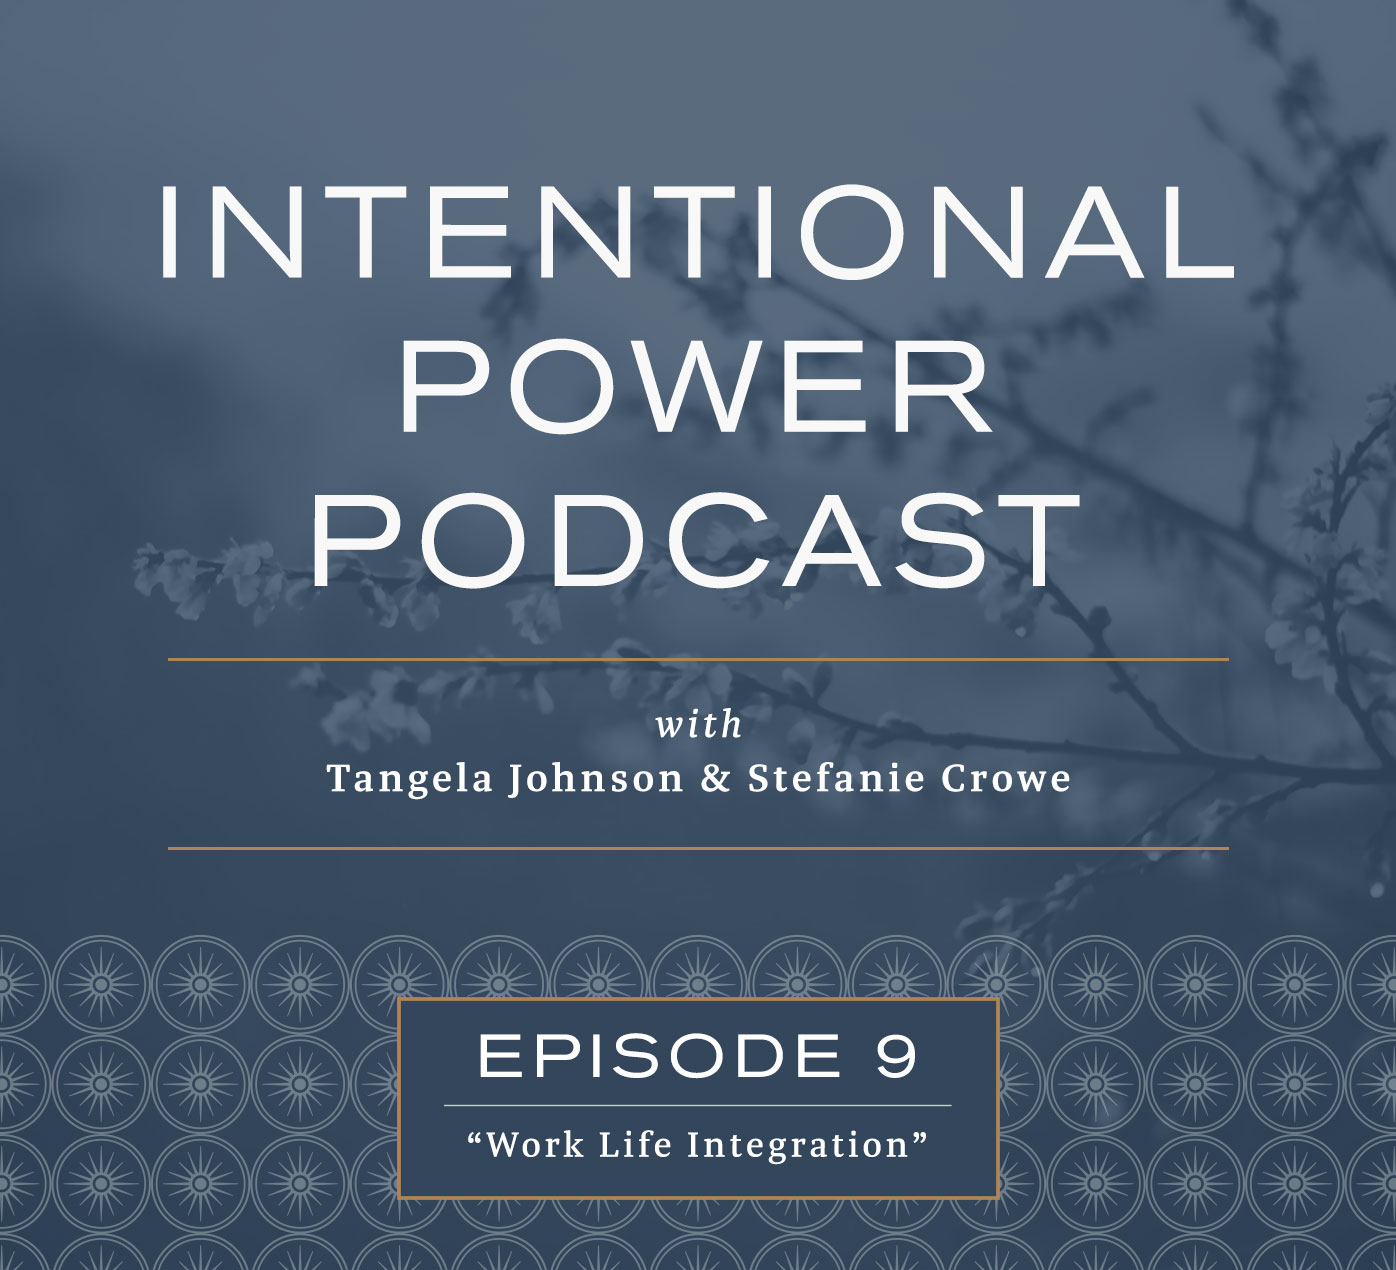 Intentional Power Podcast - Episode 9